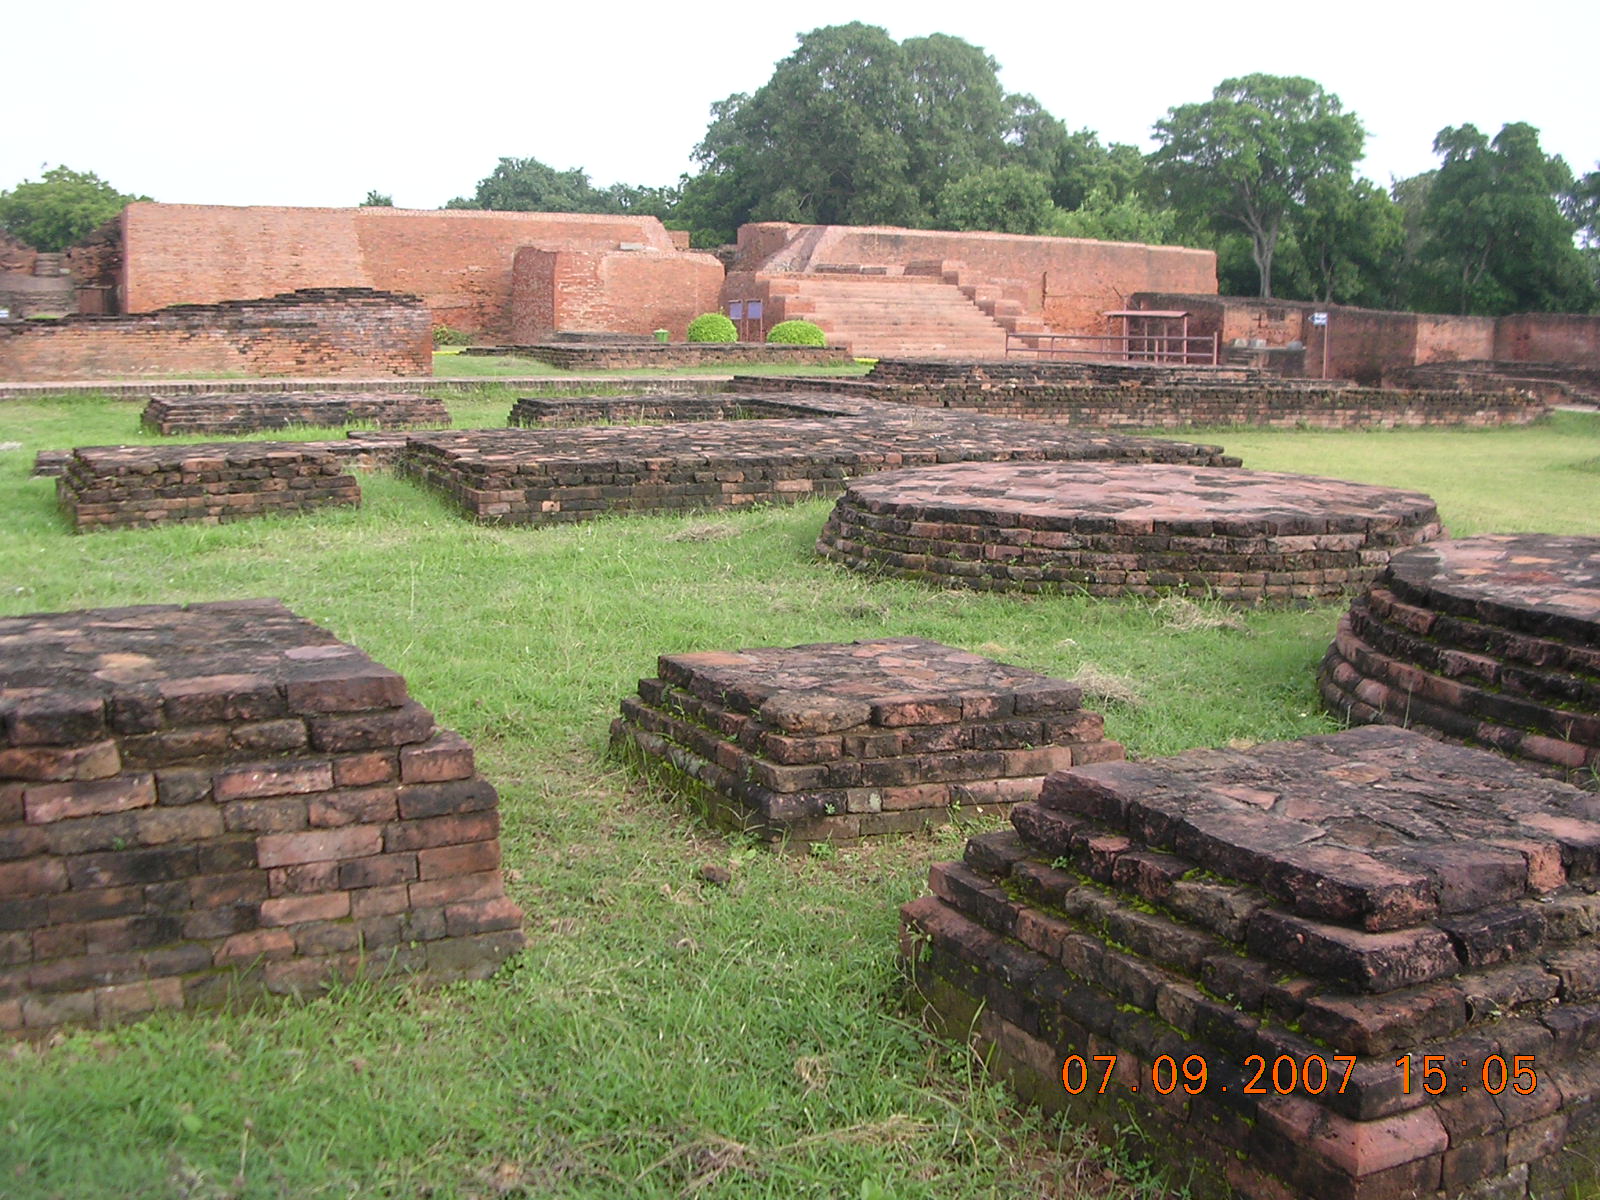 The Source For Picture: Nalanda University Ruins in India